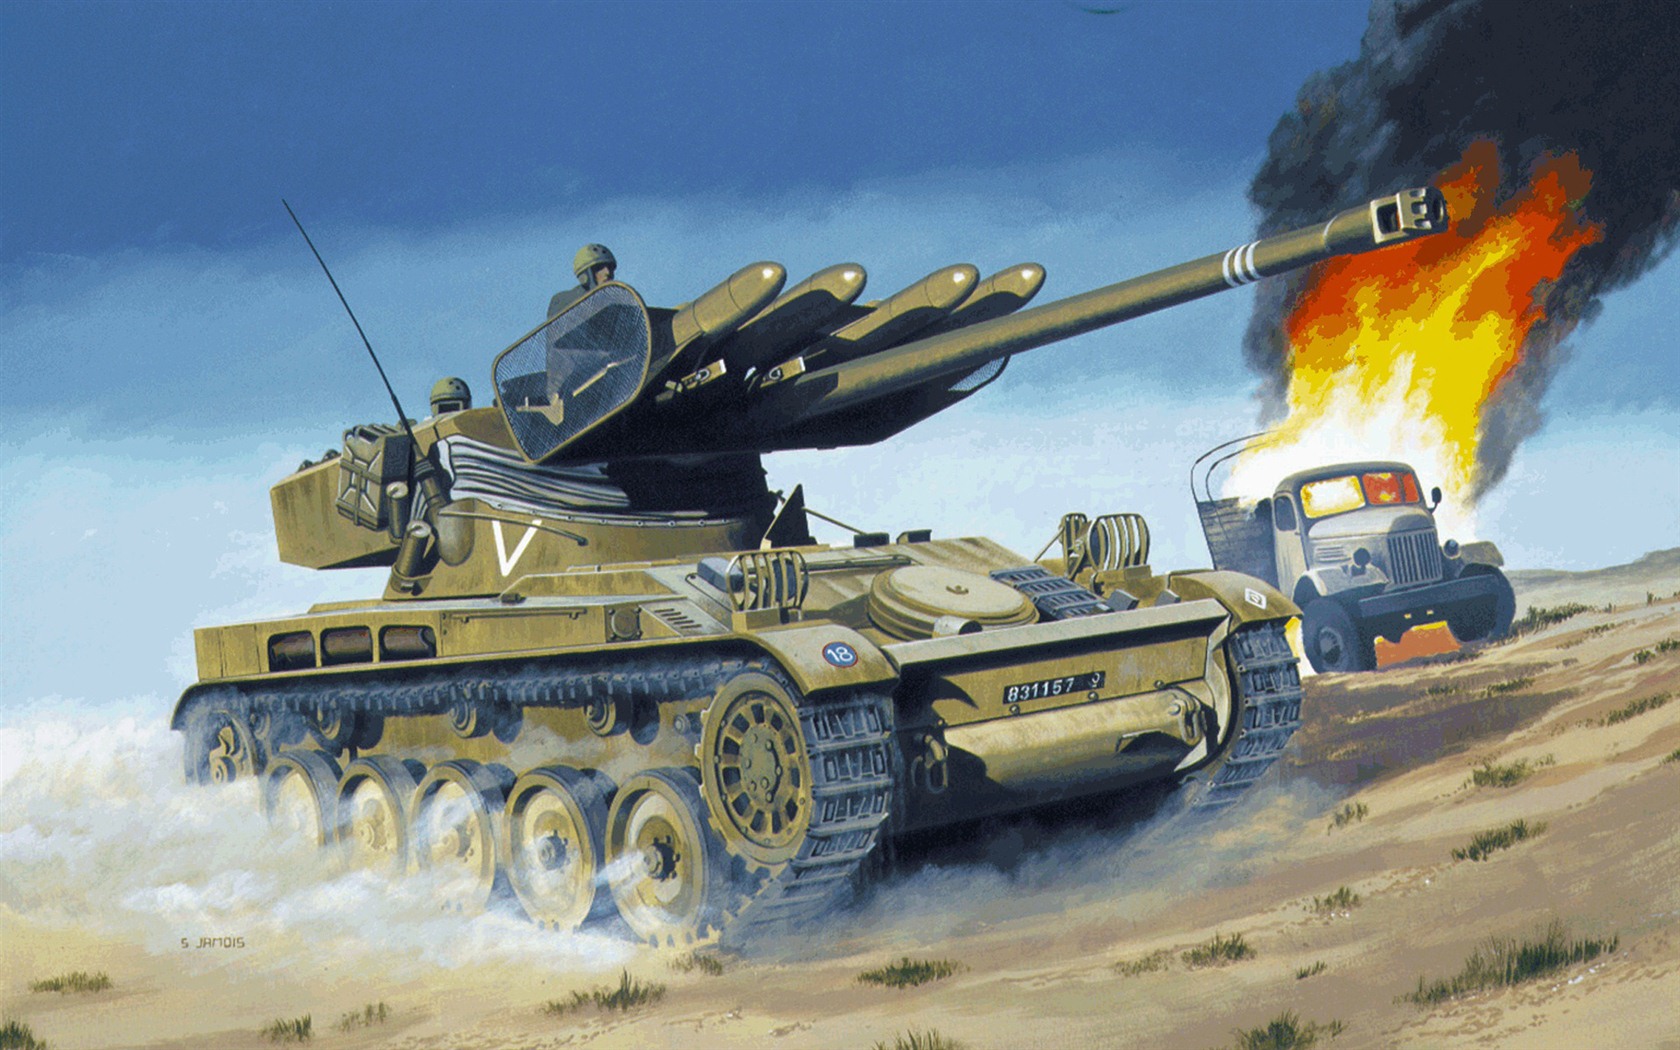 Military tanks, armored HD painting wallpapers #5 - 1680x1050